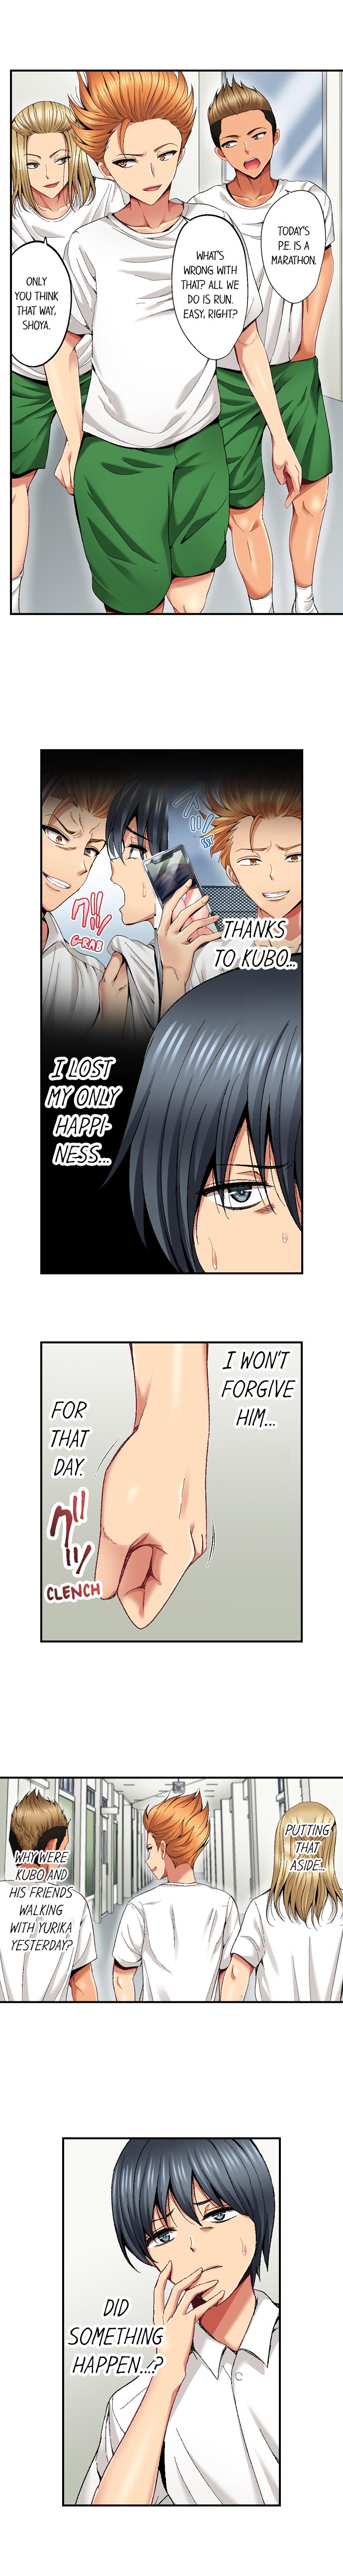 Netorare My Teacher With My Friends - Chapter 16 Page 3